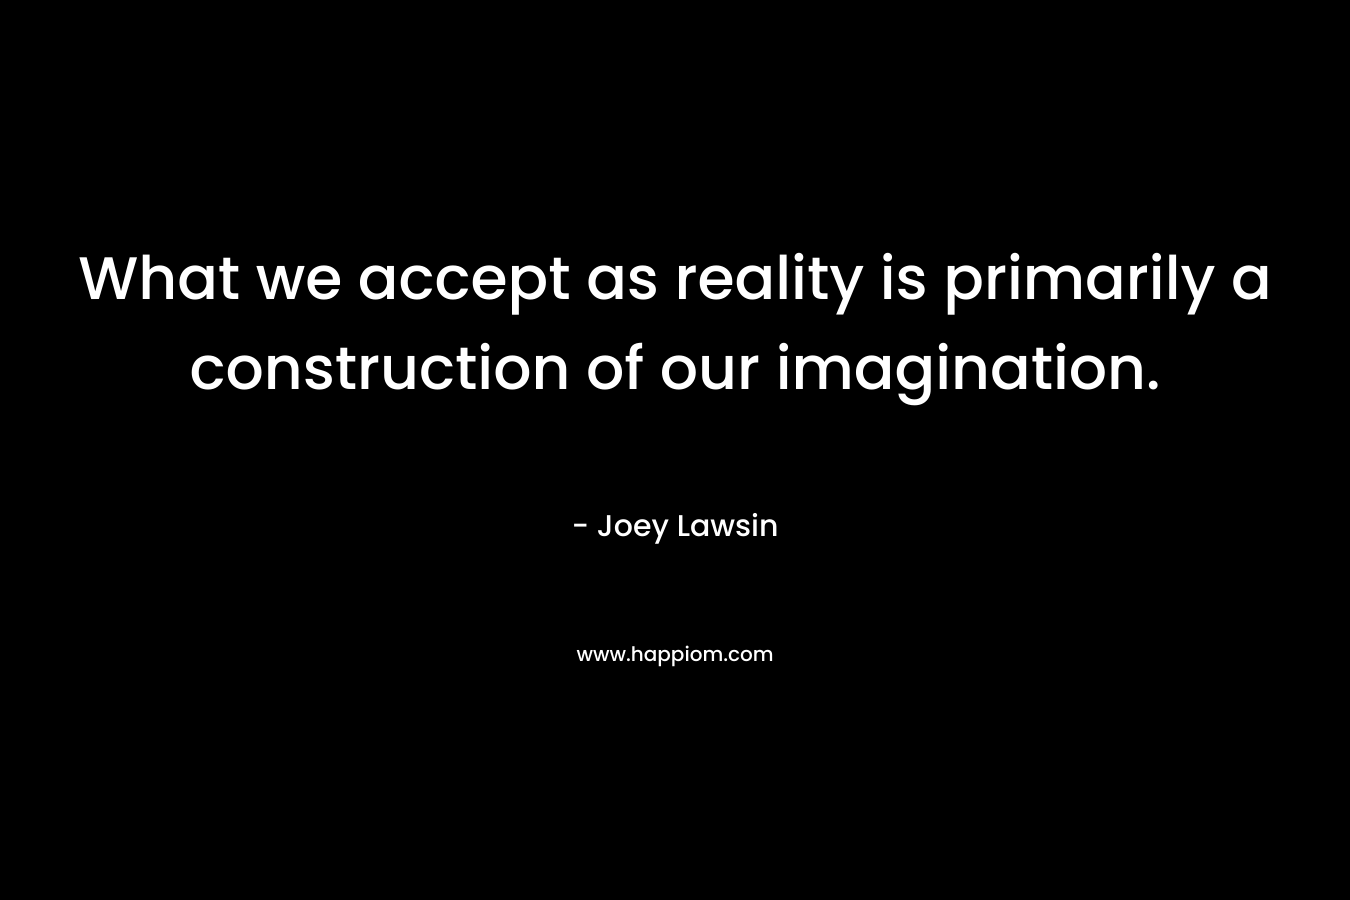 What we accept as reality is primarily a construction of our imagination. – Joey Lawsin